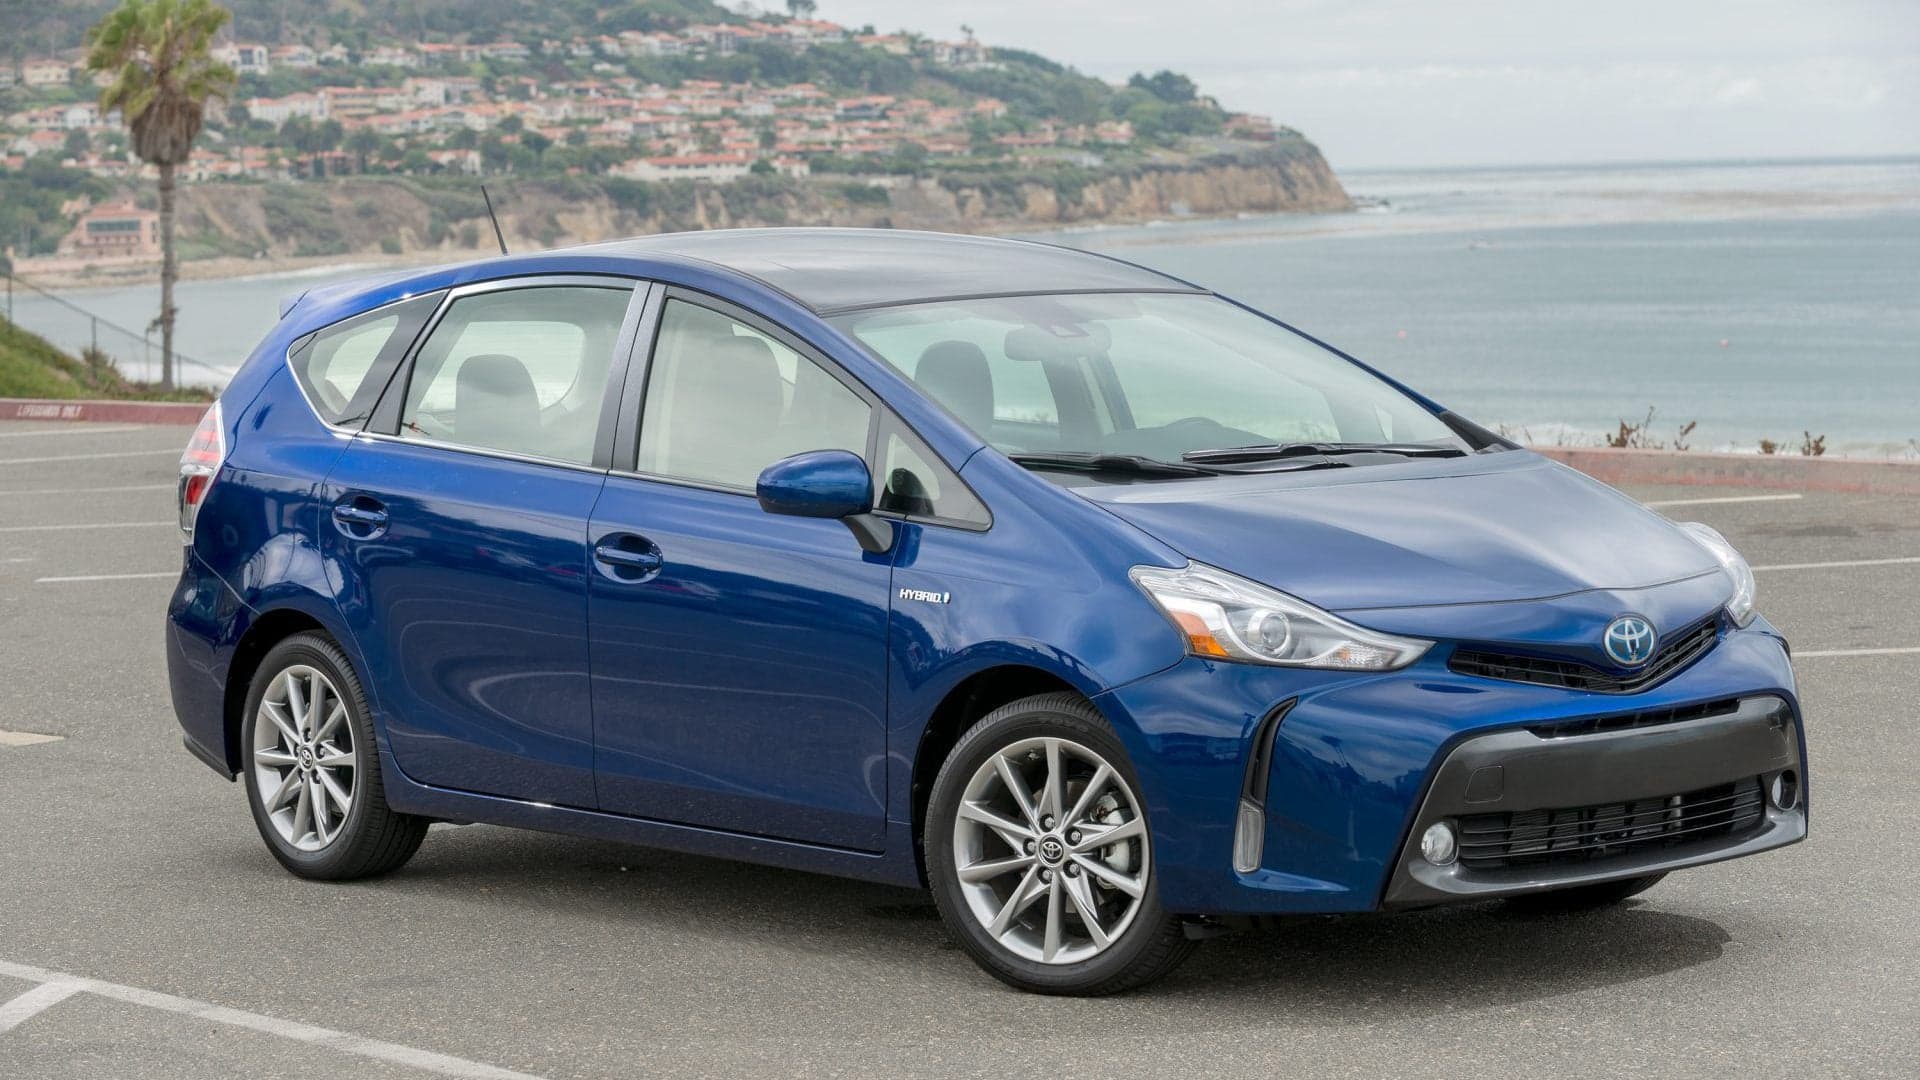 Toyota Recalling 49,000 Prius and Lexus Vehicles for Airbag Problem